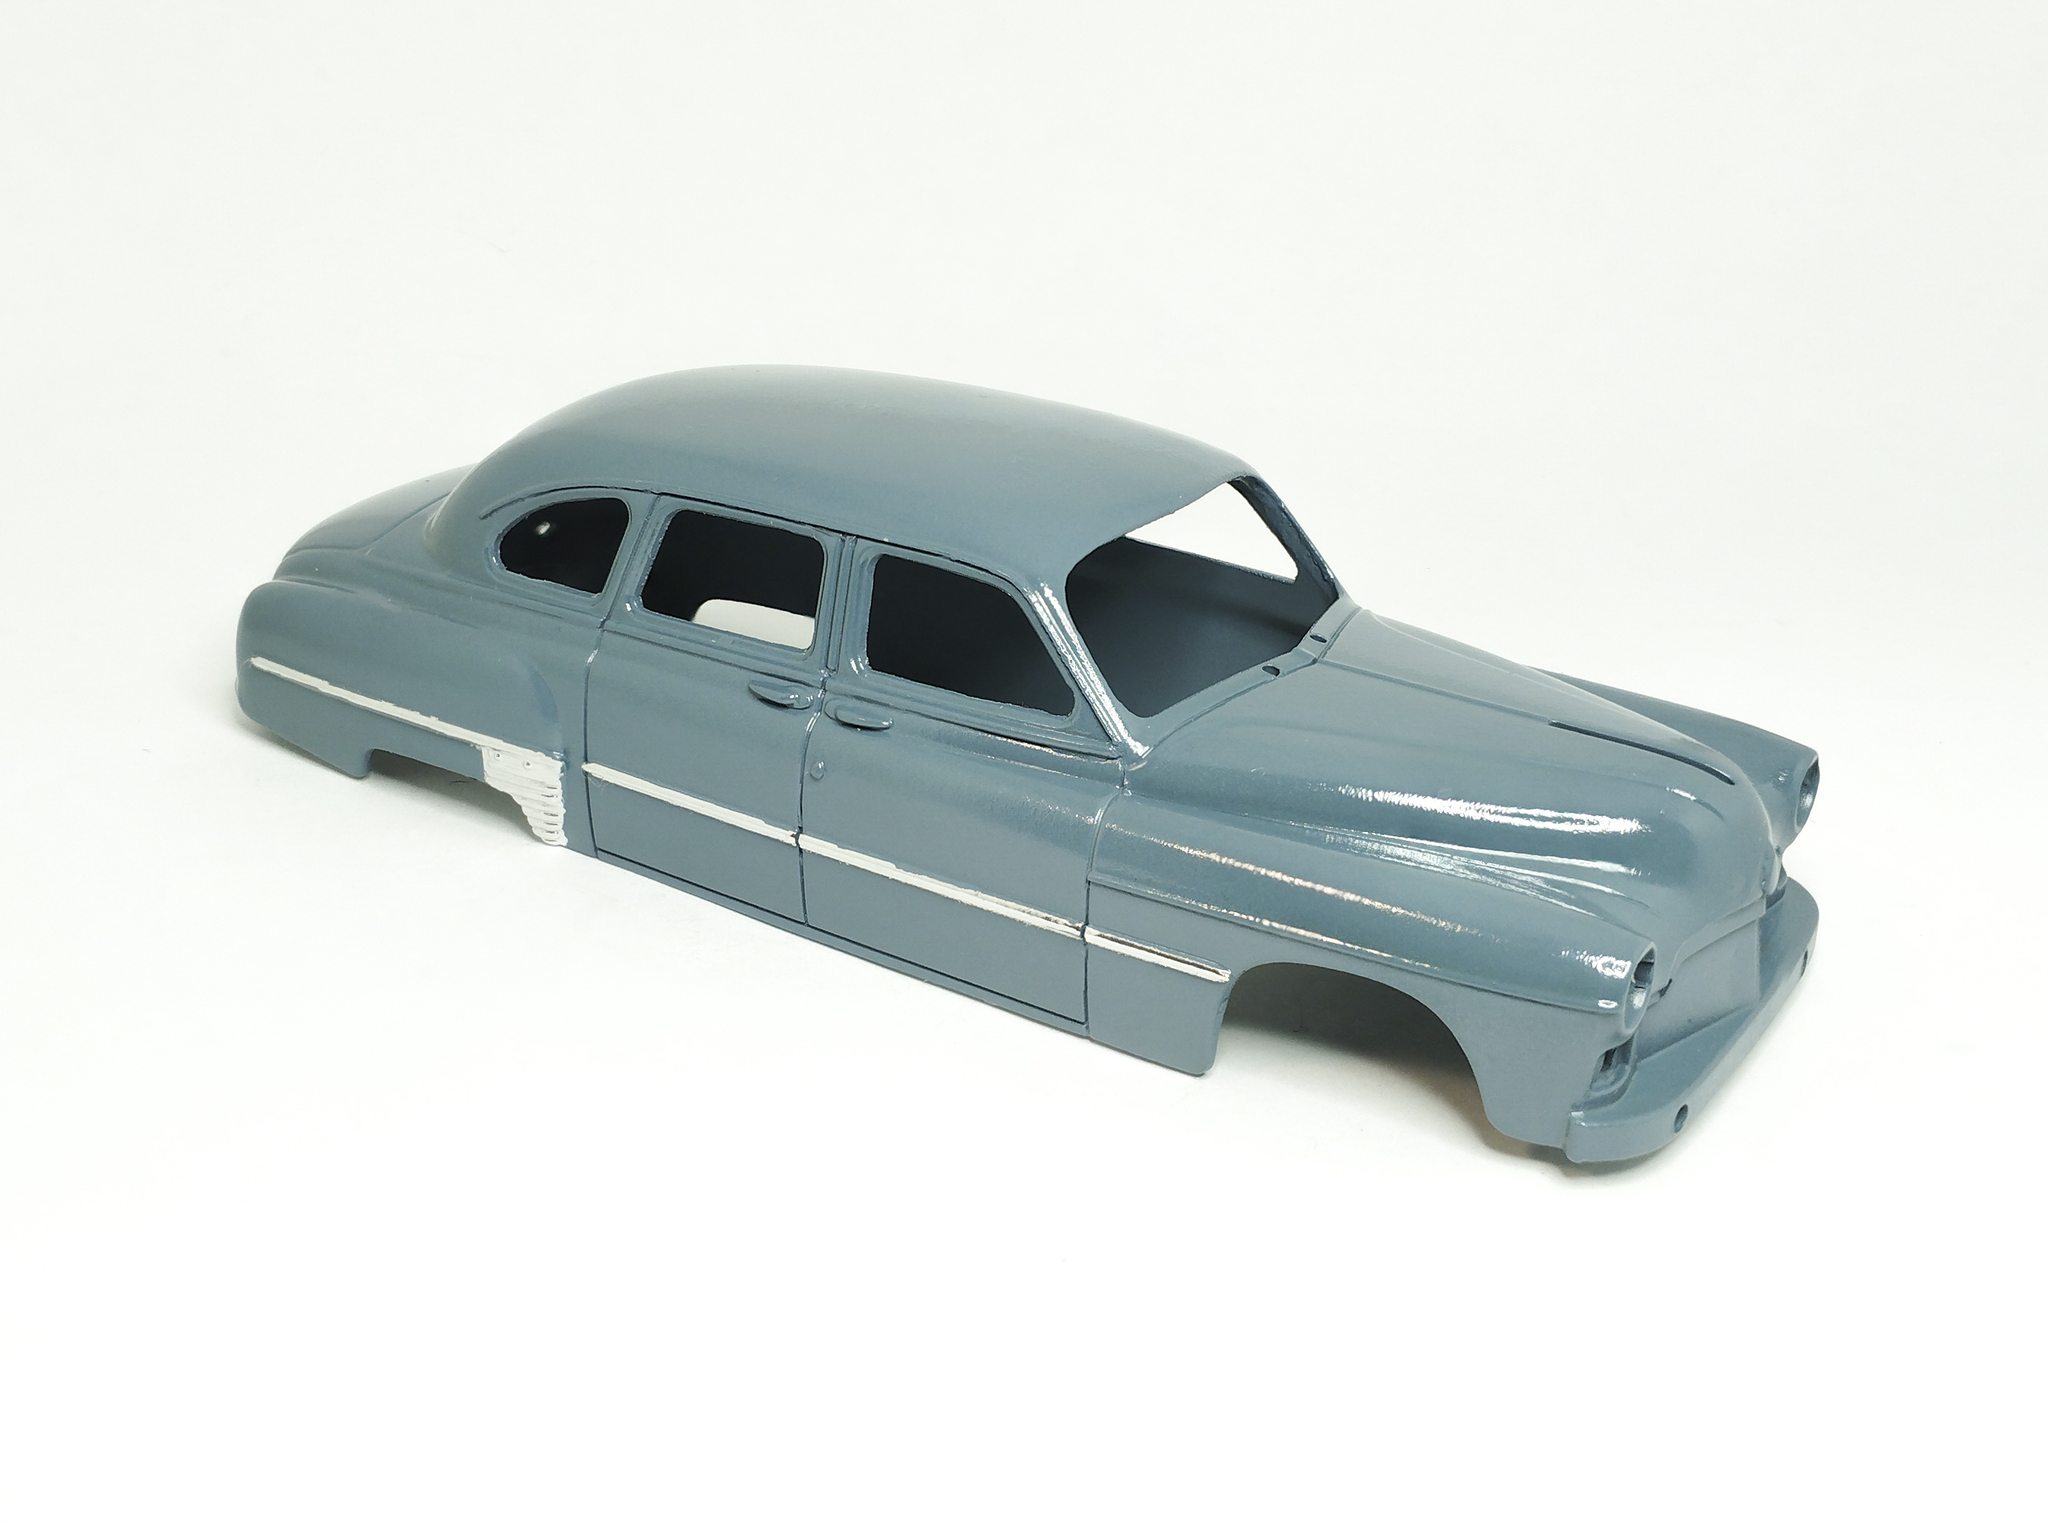 Conversion of the GAZ-12 ZIM - Taxi model on a scale of 1:43 - My, Collecting, Modeling, Collection, Conversion, Stand modeling, Painting miniatures, Winter, Deagostini, Scalemodels, Domestic auto industry, Miniature, Tamiya, Dyeing, Airbrush, Longpost, Gaz-12